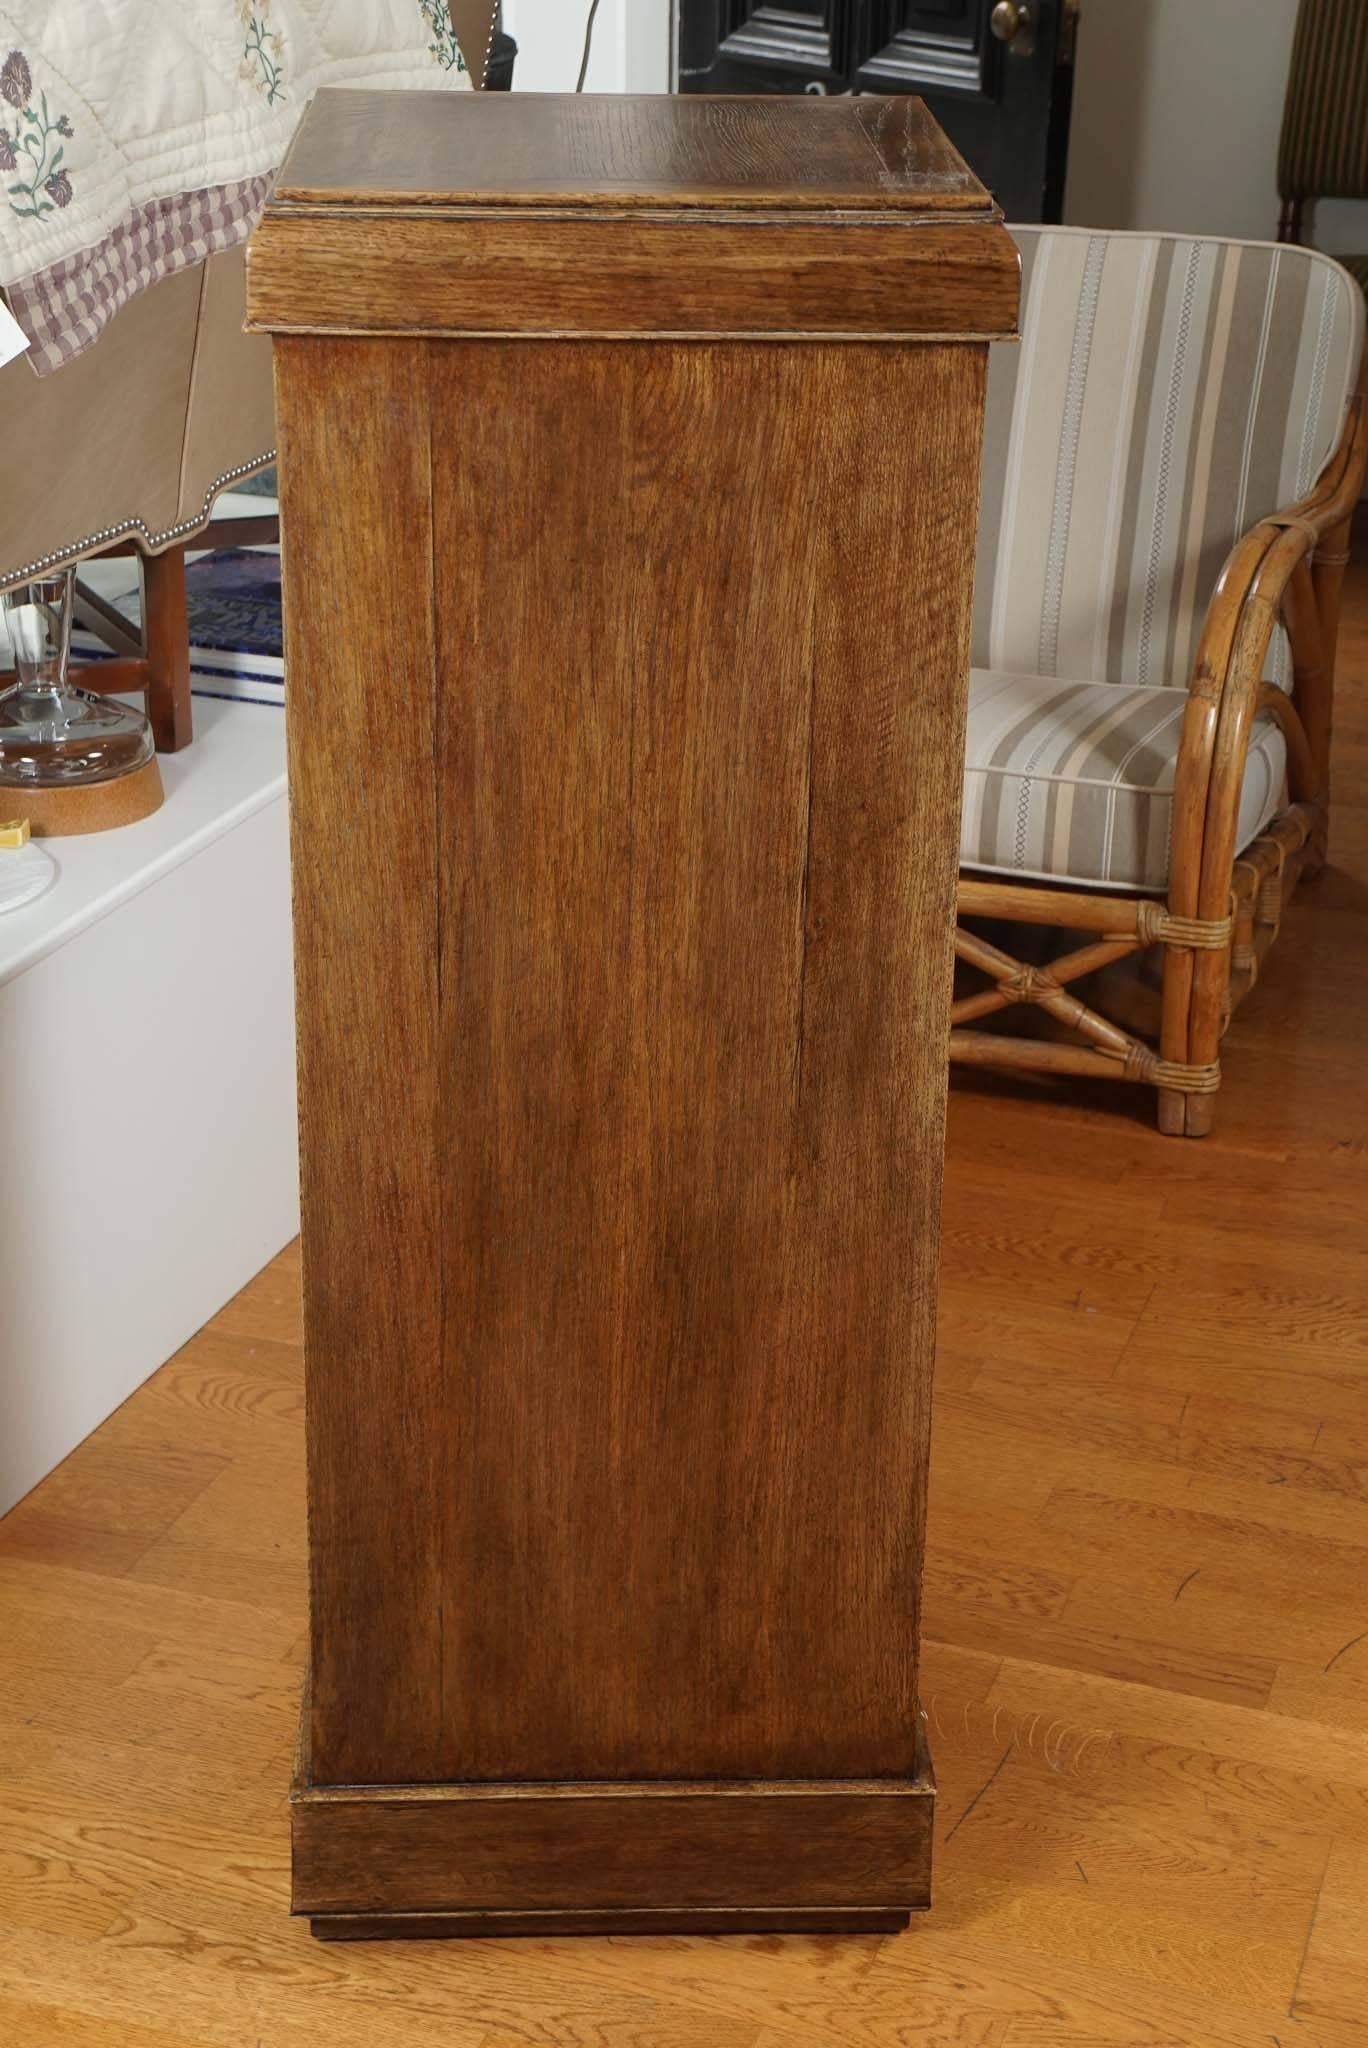 Solid oak pedestal, with beveled and mitered detailing.
Designed by Mary Cunningham.